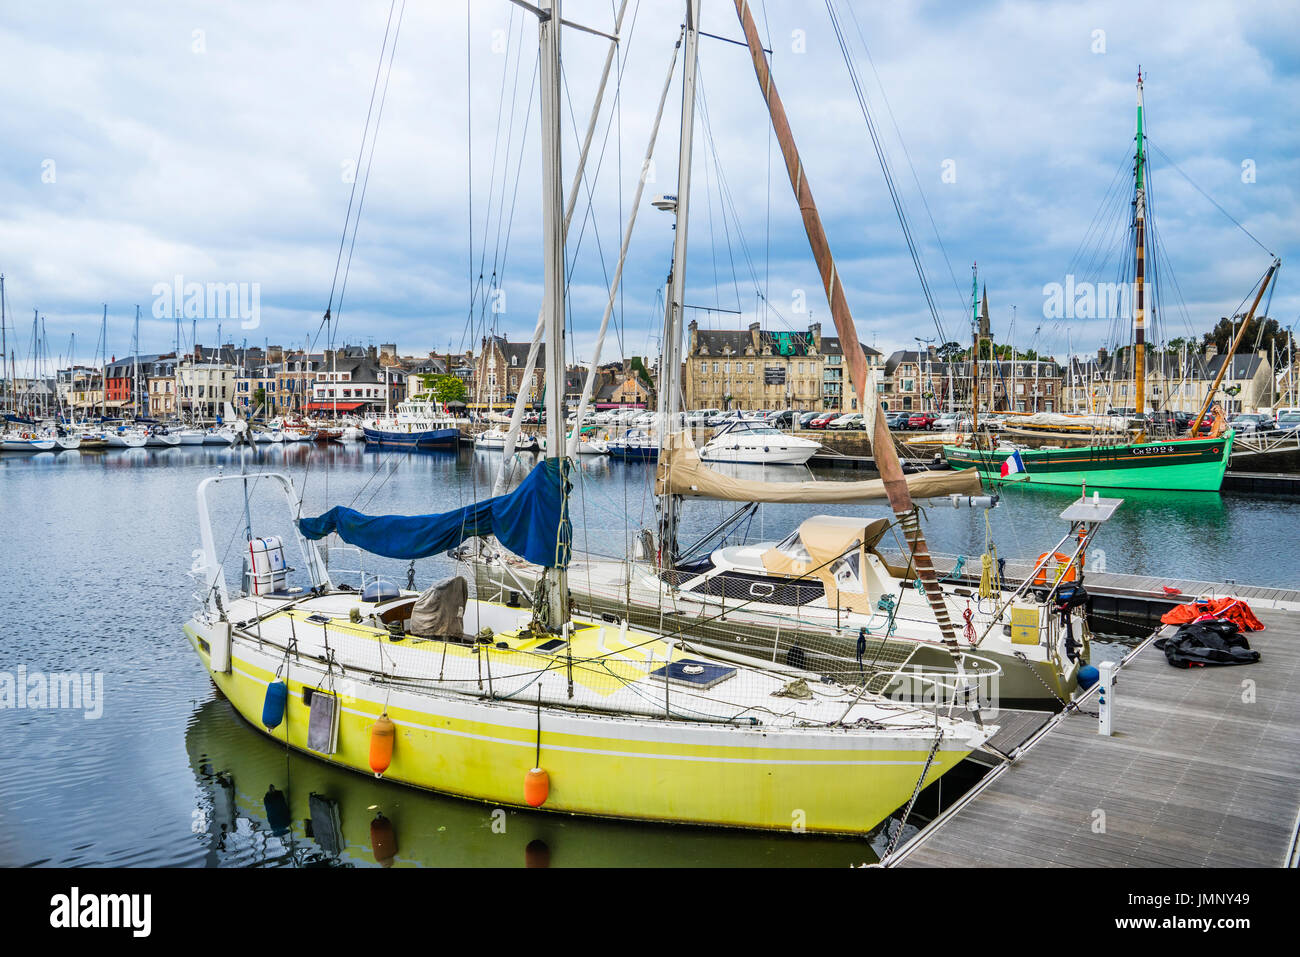 France, Brittany, Cotes-d'Armor department, Paimpol, yachts at the Port of Paimpol Stock Photo